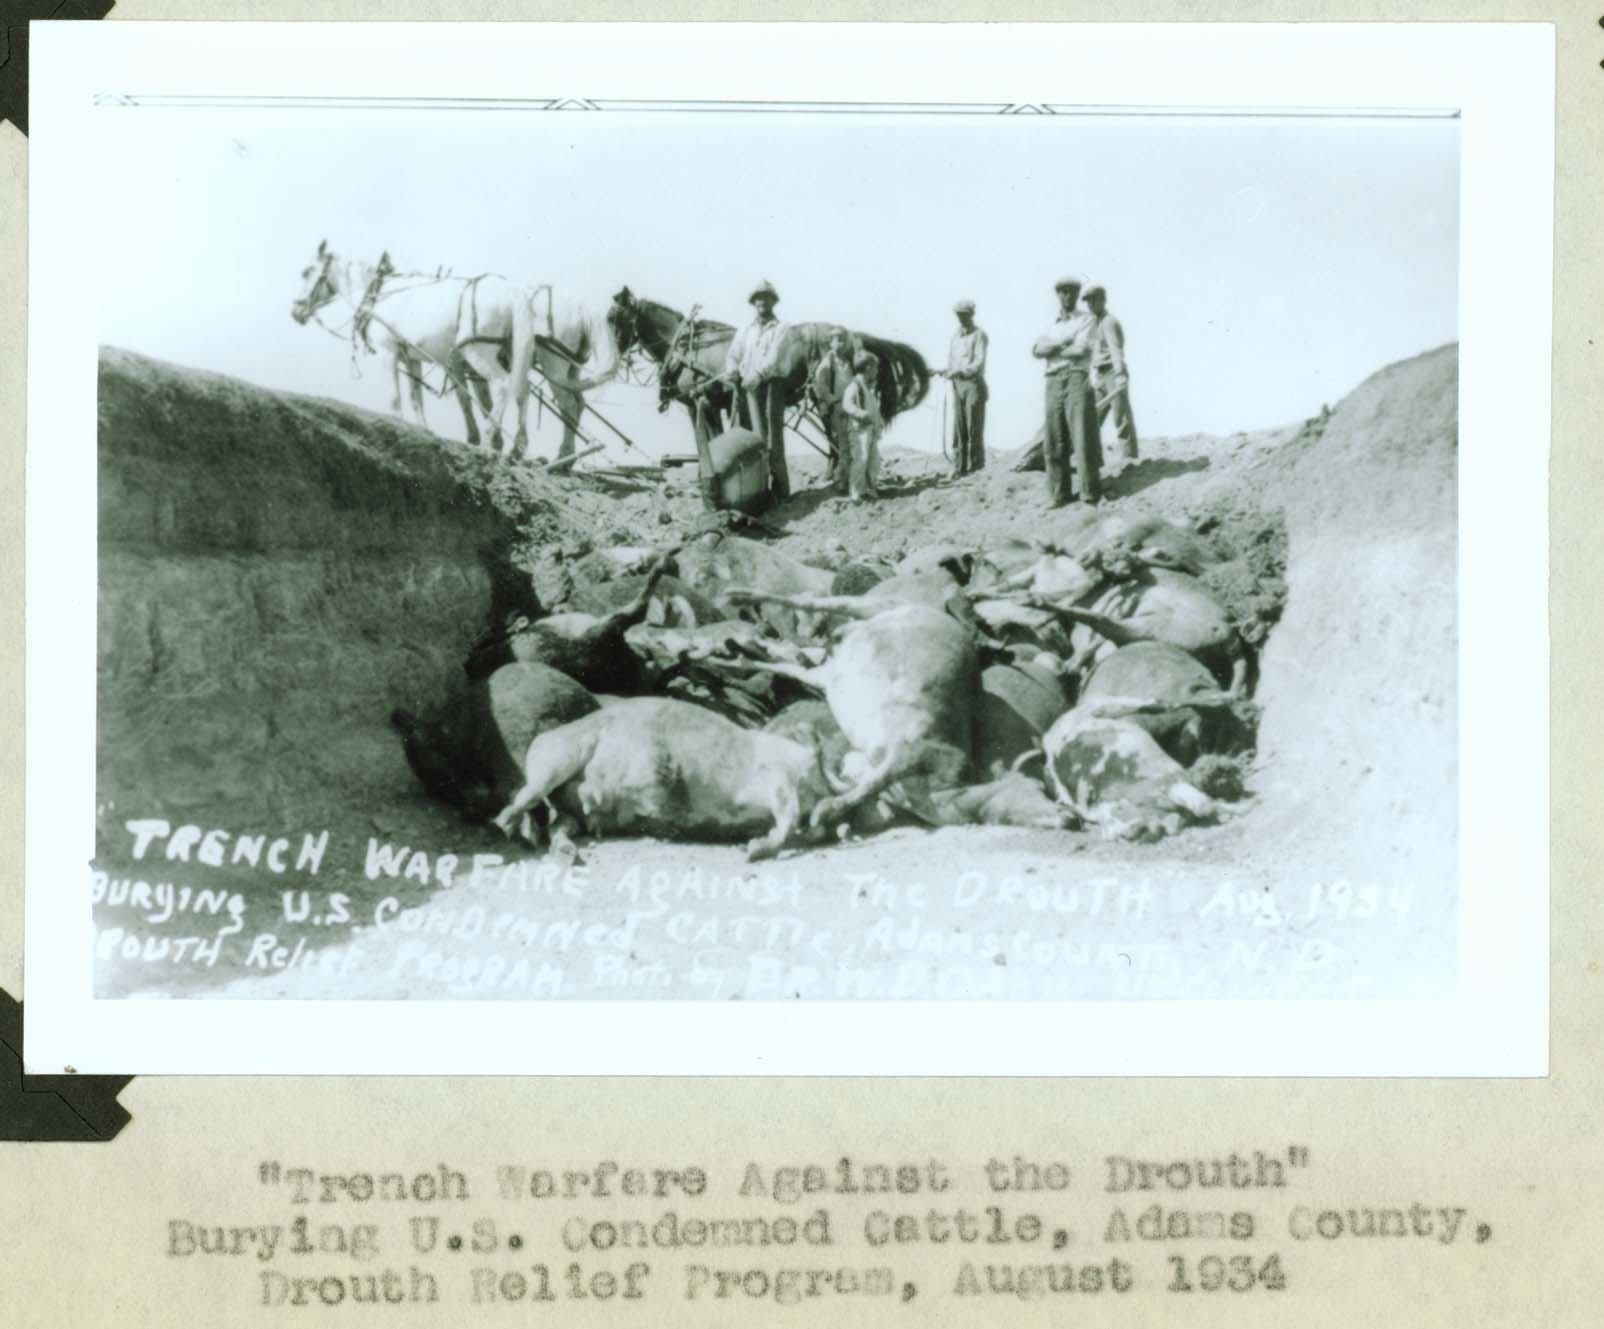 Trench warfare against the drouth, Adams County